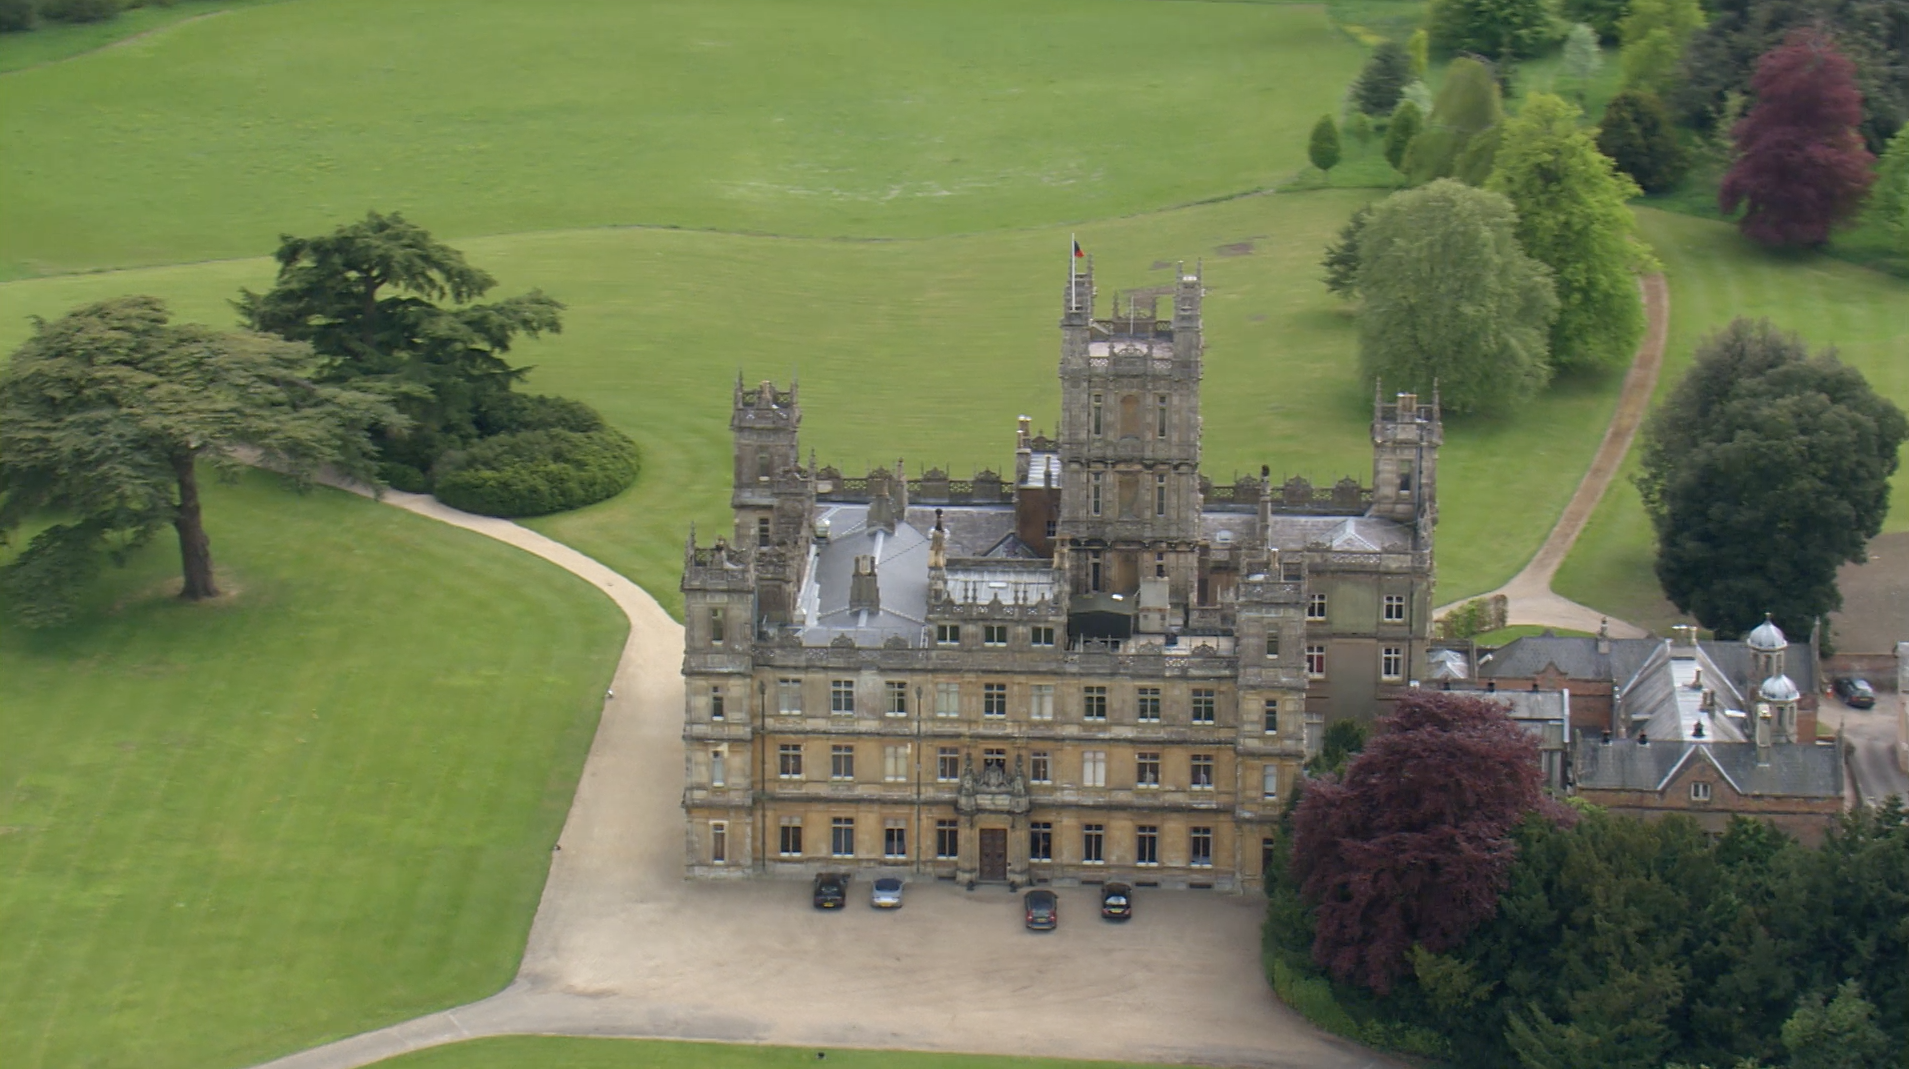 Unsolicited Financial Advice for the Folks of Downton Abbey